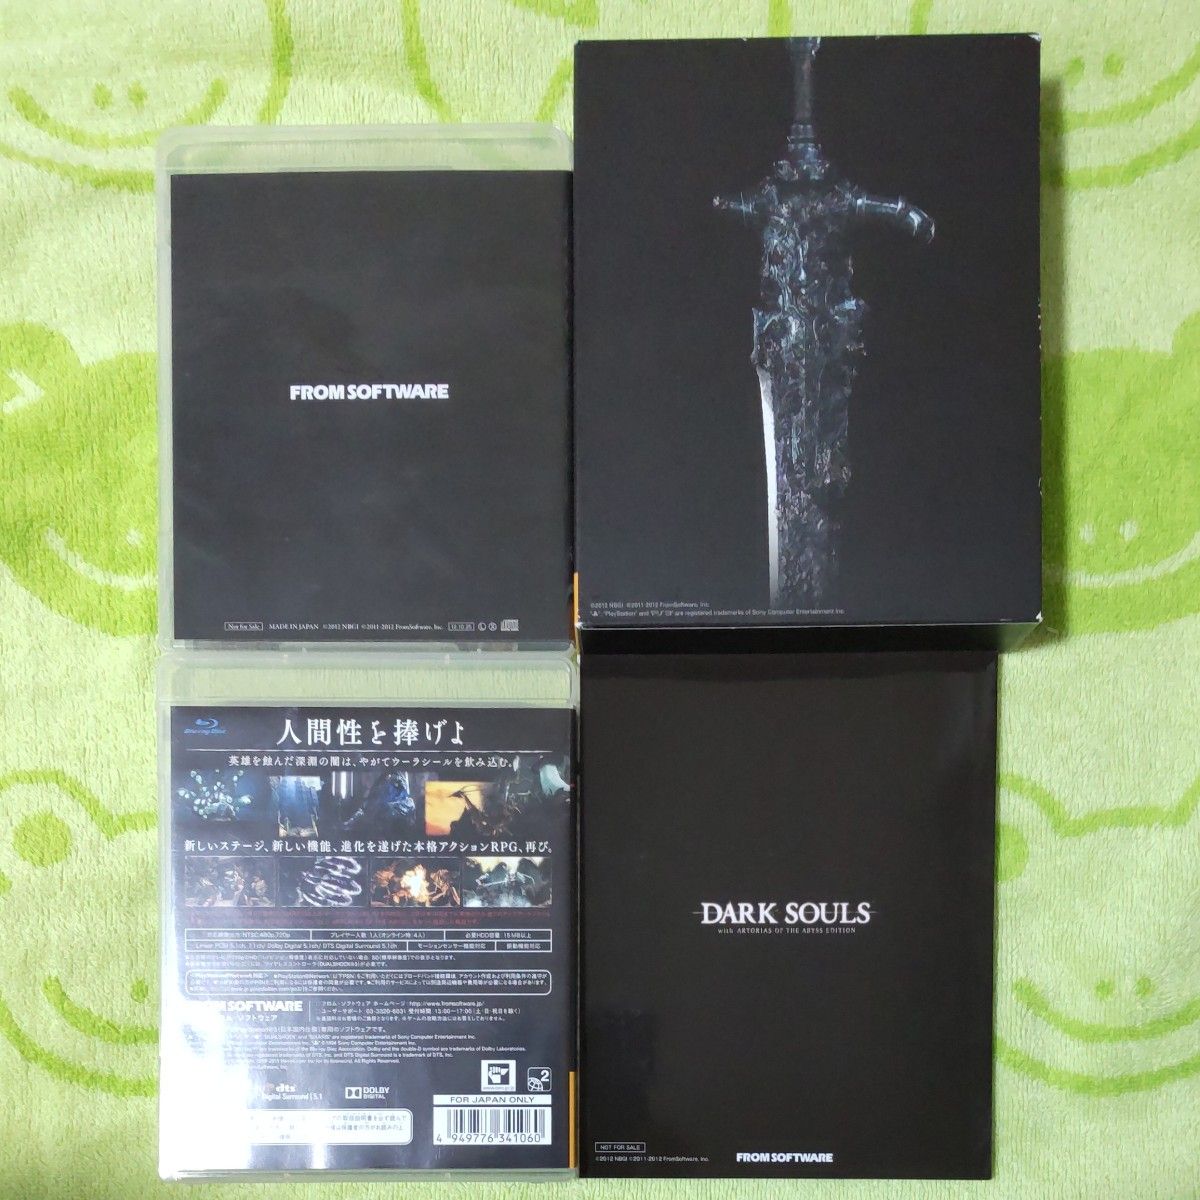 DARK SOULS with ARTORIAS OF THE ABYSS EDITION Map & Soundtrack